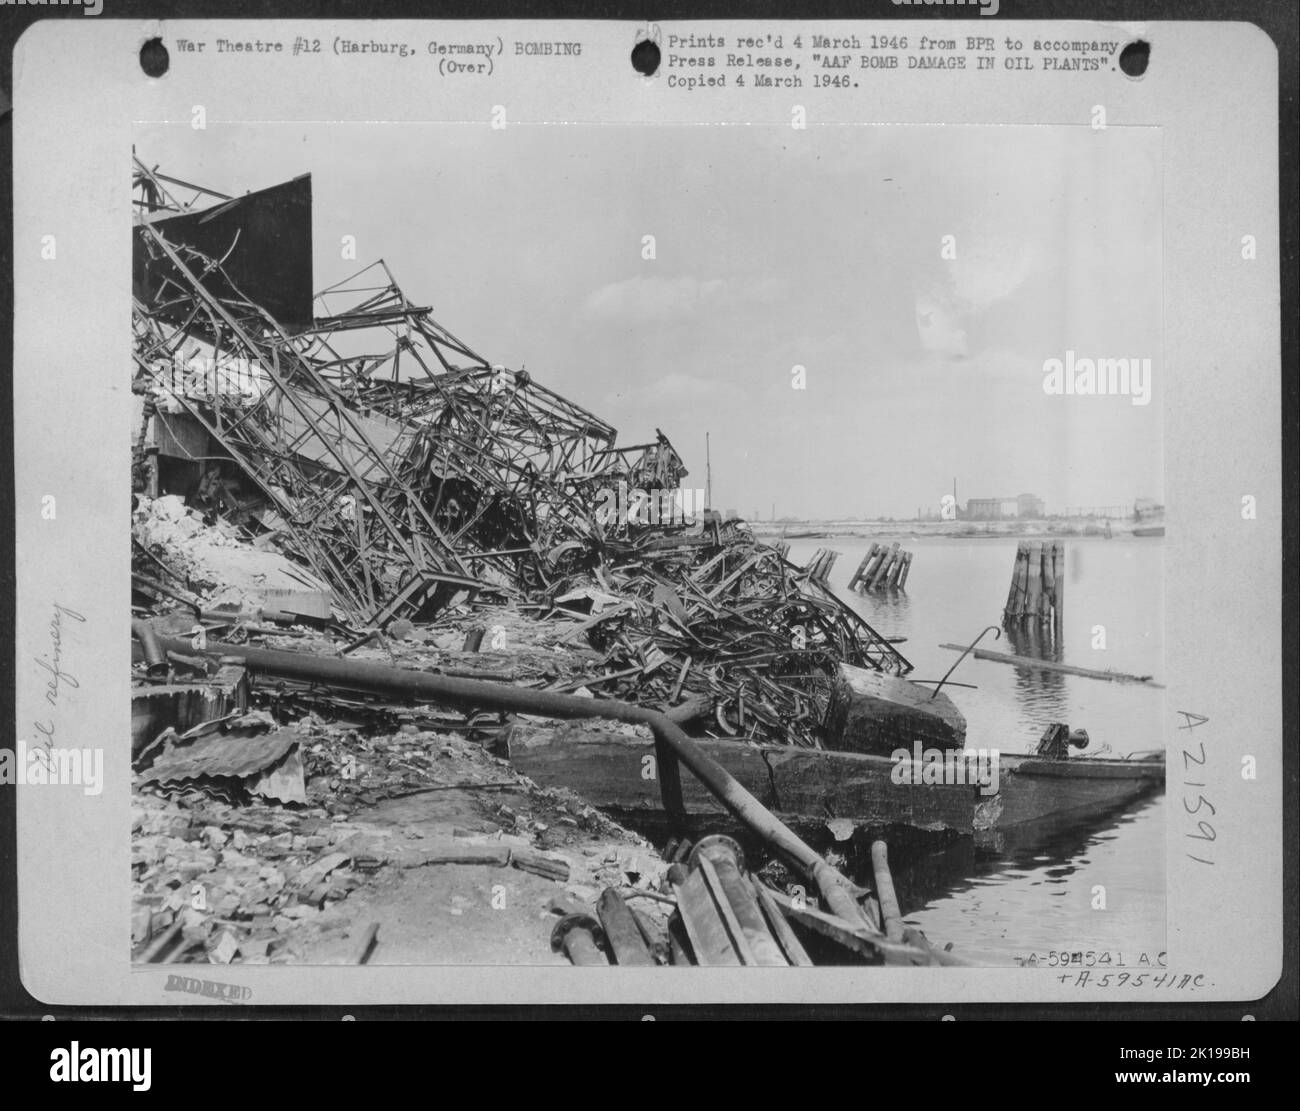 Aaf Bomb Damage In Oil Plants -- Docks And Shore Installations Lie In Tangled Uselessness, The Product Of Aaf Attacks To Throttle German Military Power Thru The Destruction Of The Germany Oil Supply, Production Adn Transportation Facilities. This Maze Of Stock Photo